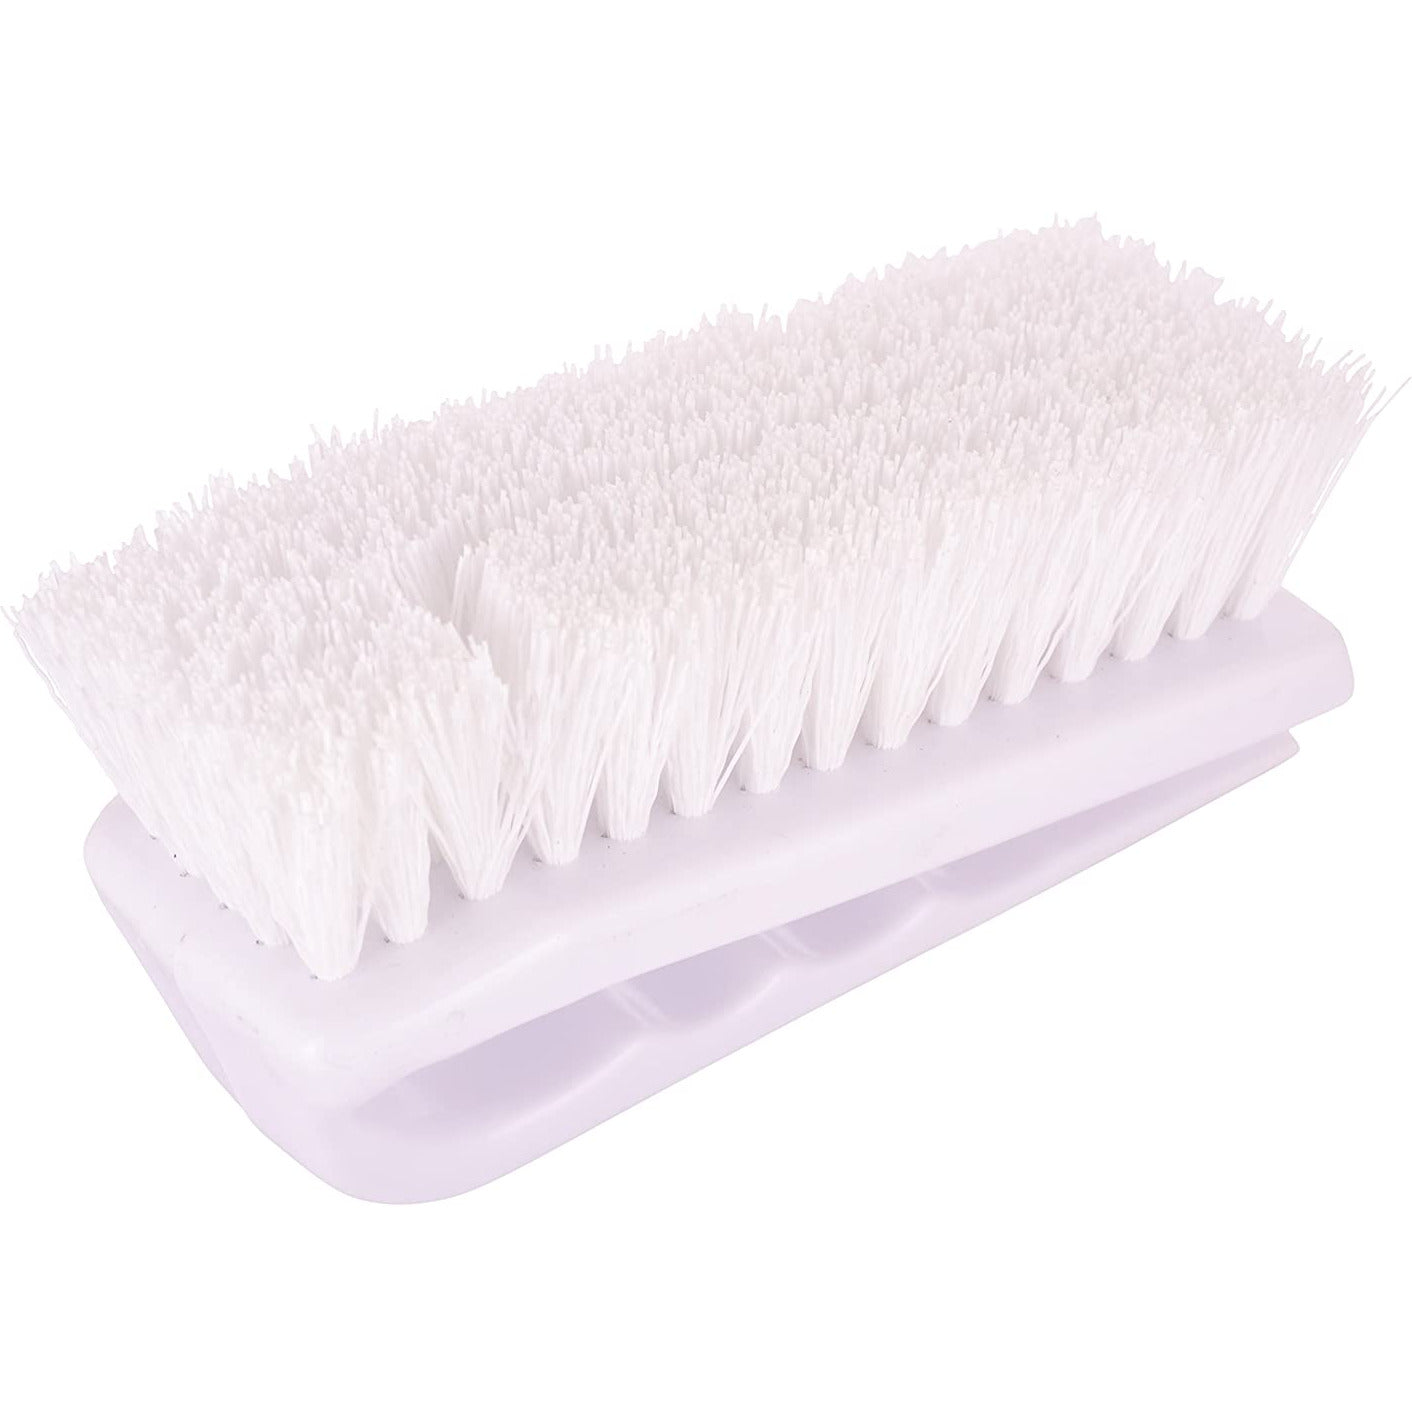 XCP BRU-2-44395 CAR Products Finger Grip Upholstery Cleaning Brush (6")